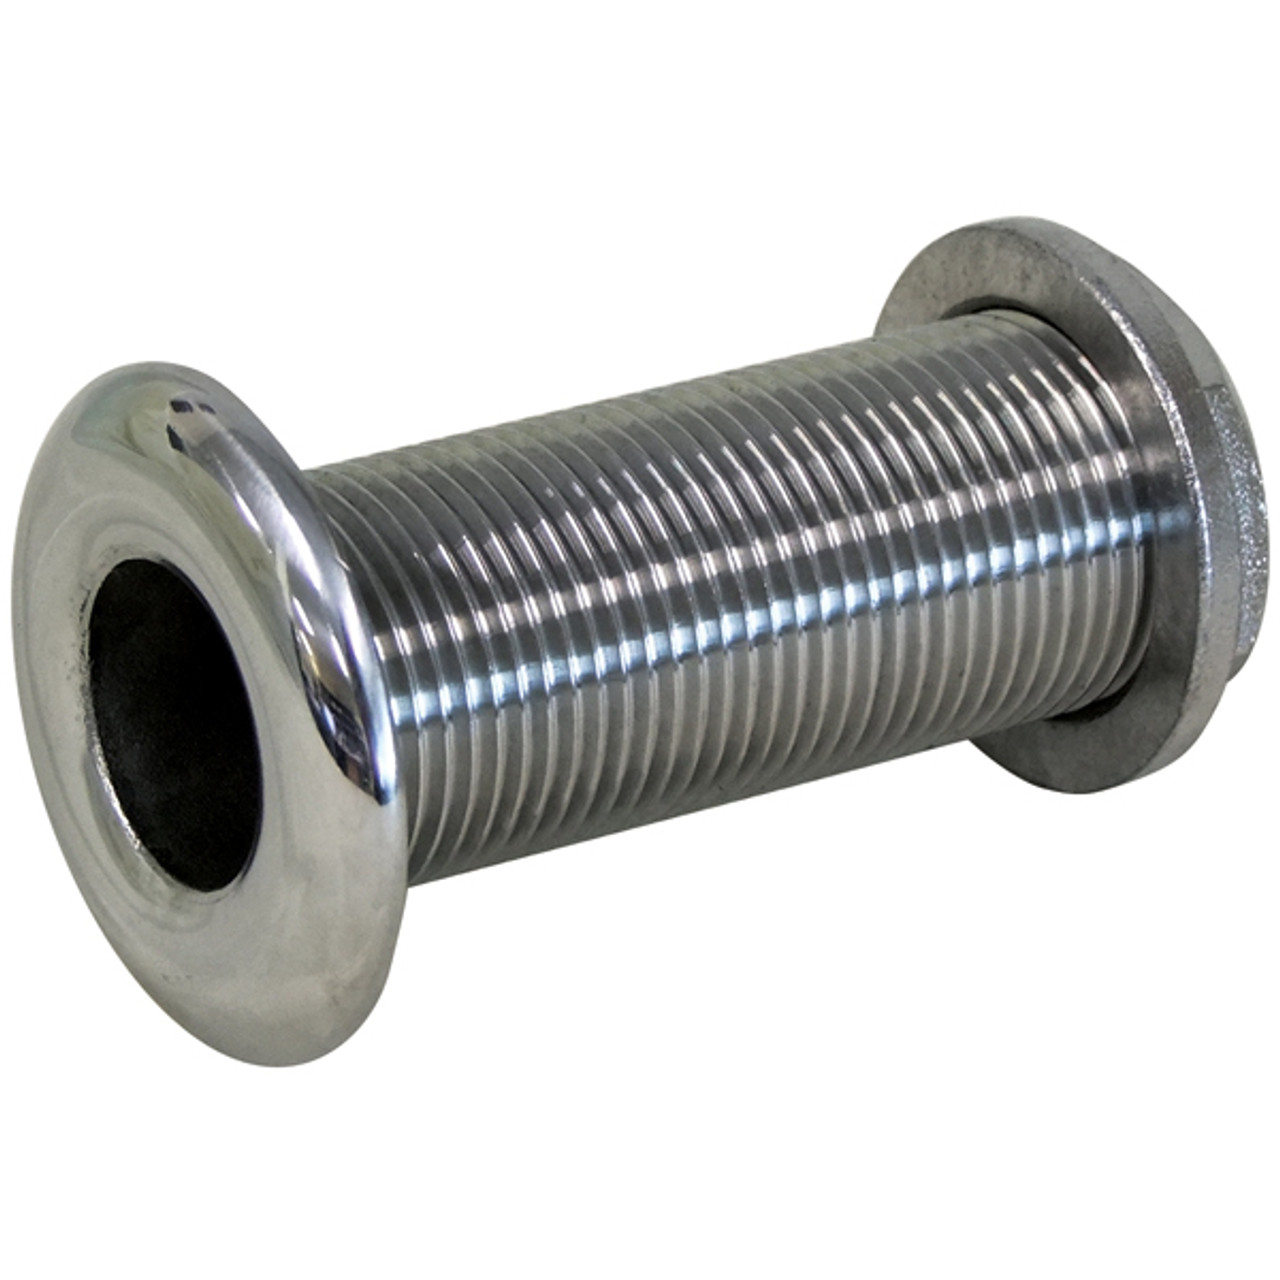 Stainless Steel Skin Fittings With Bsp Thread Boat Warehouse 6797